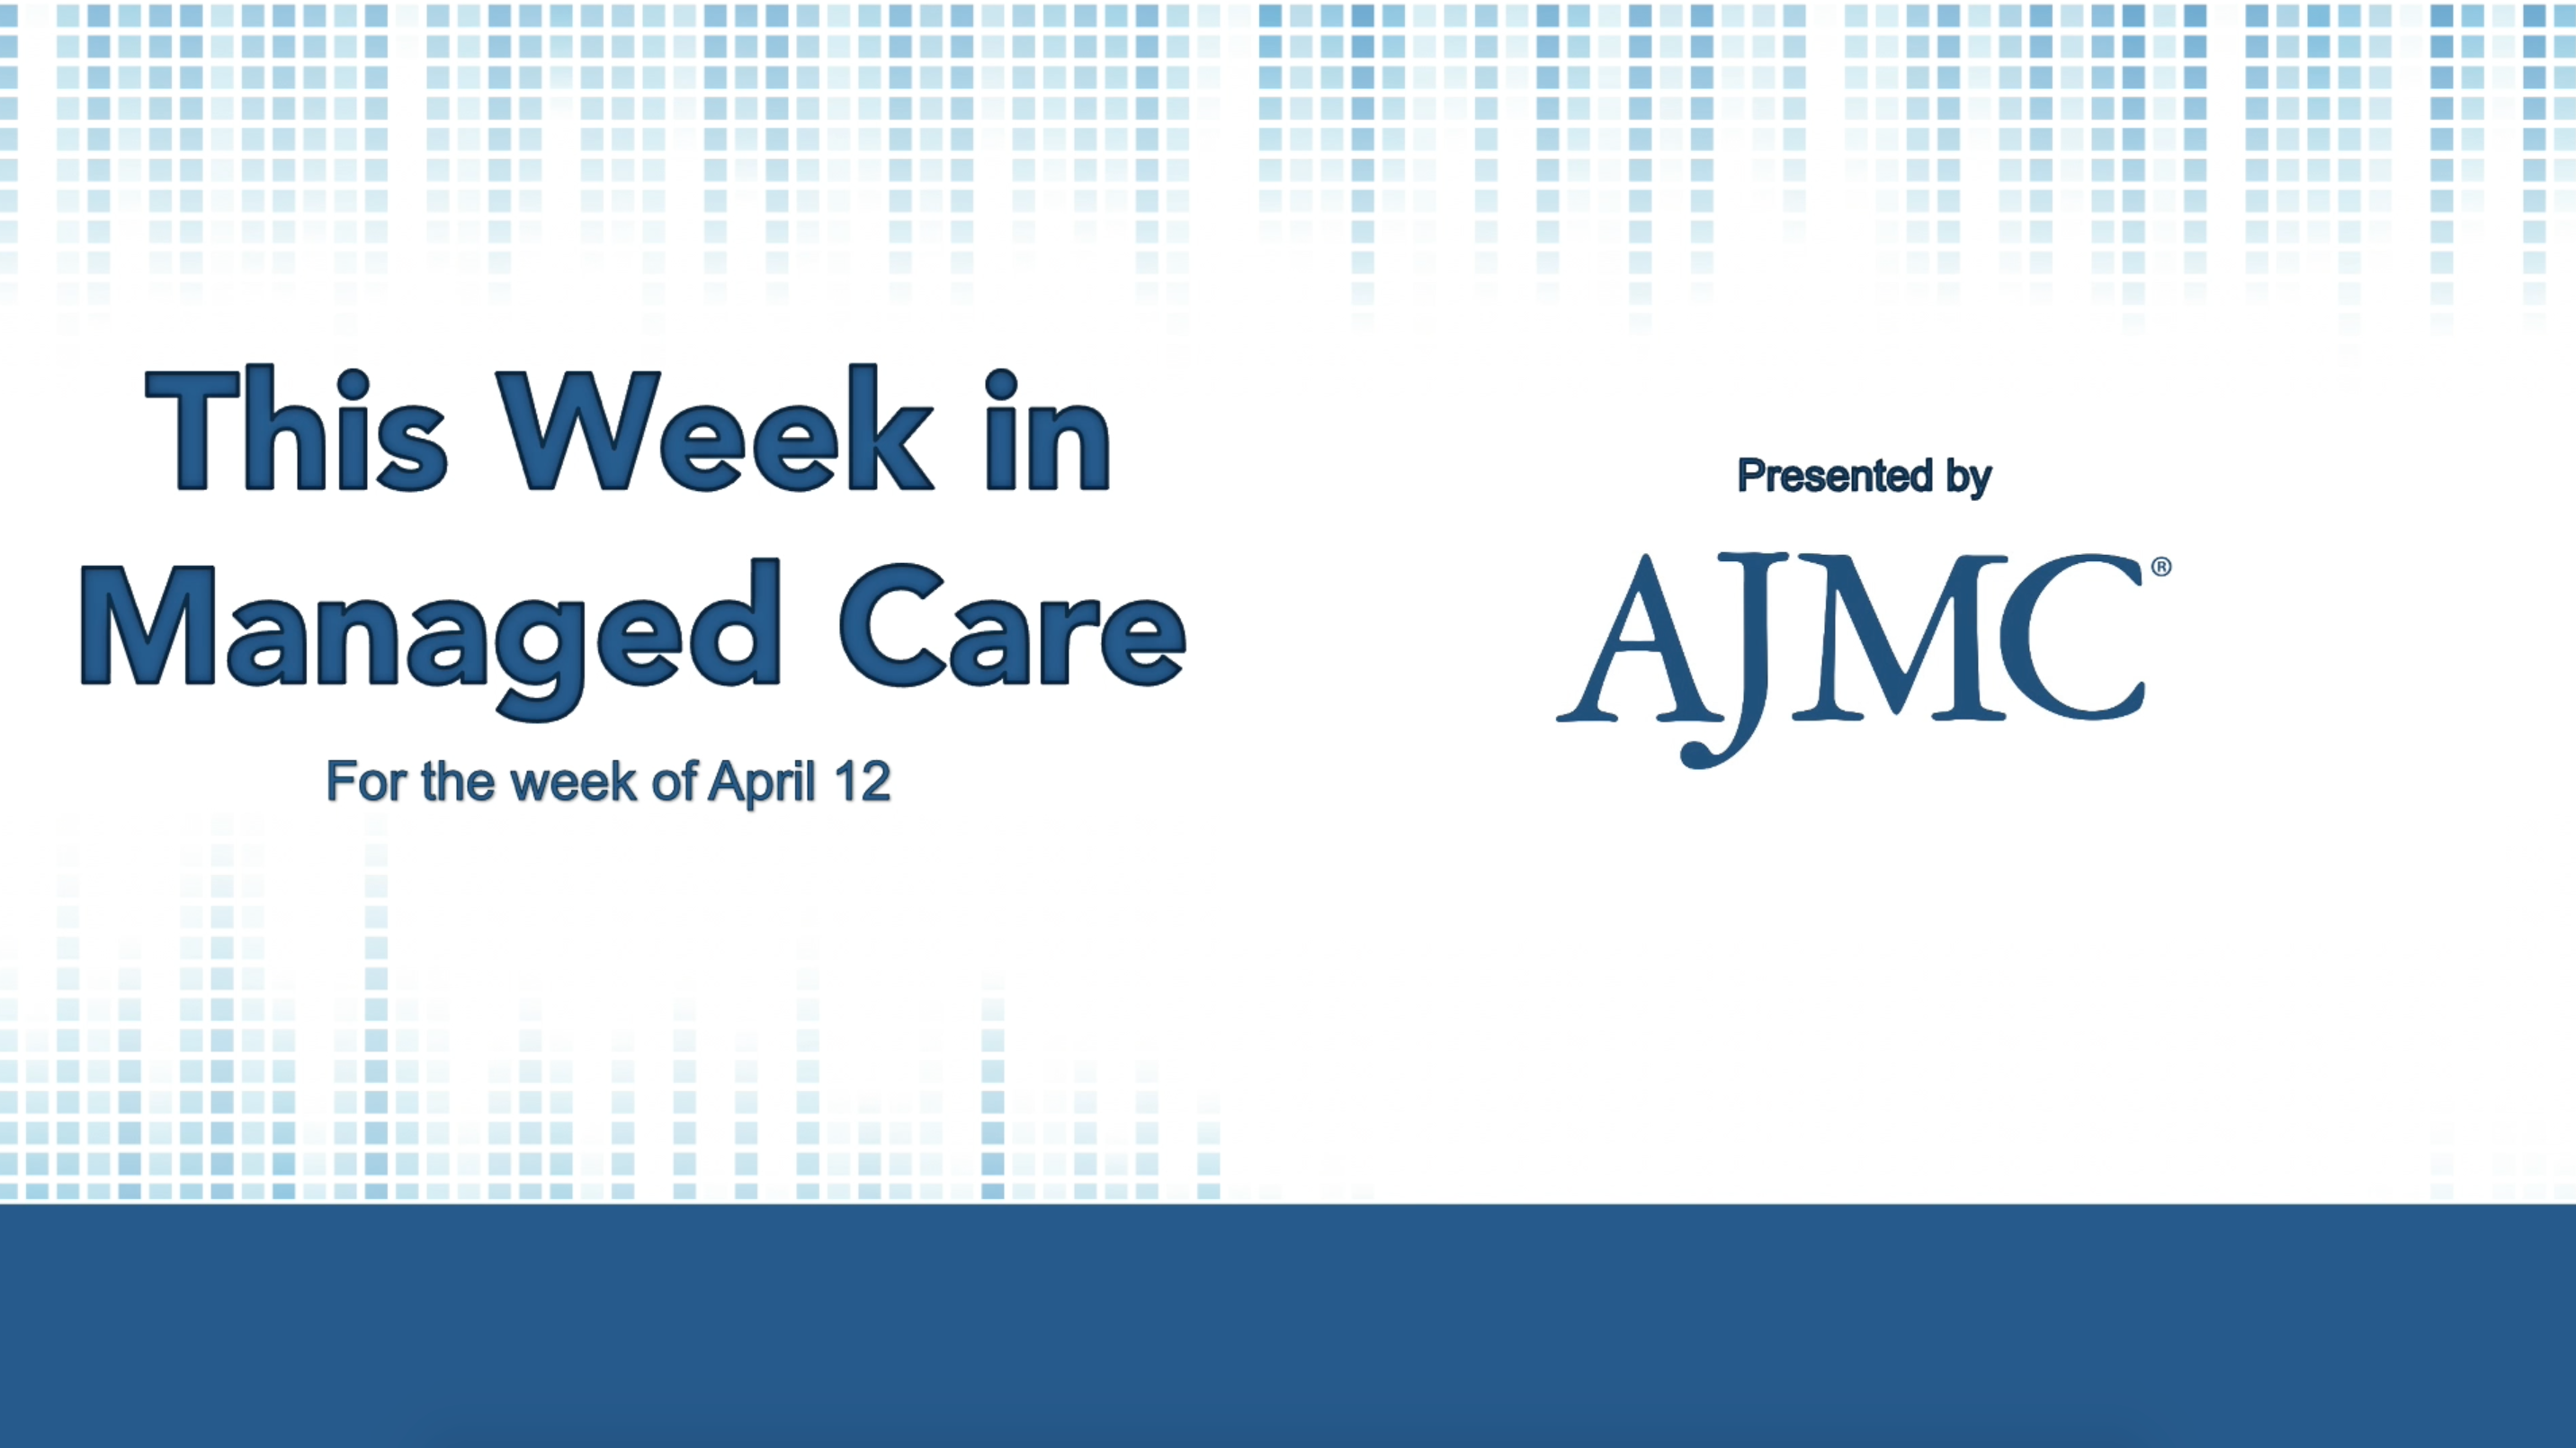 This Week in Managed Care: April 16, 2021